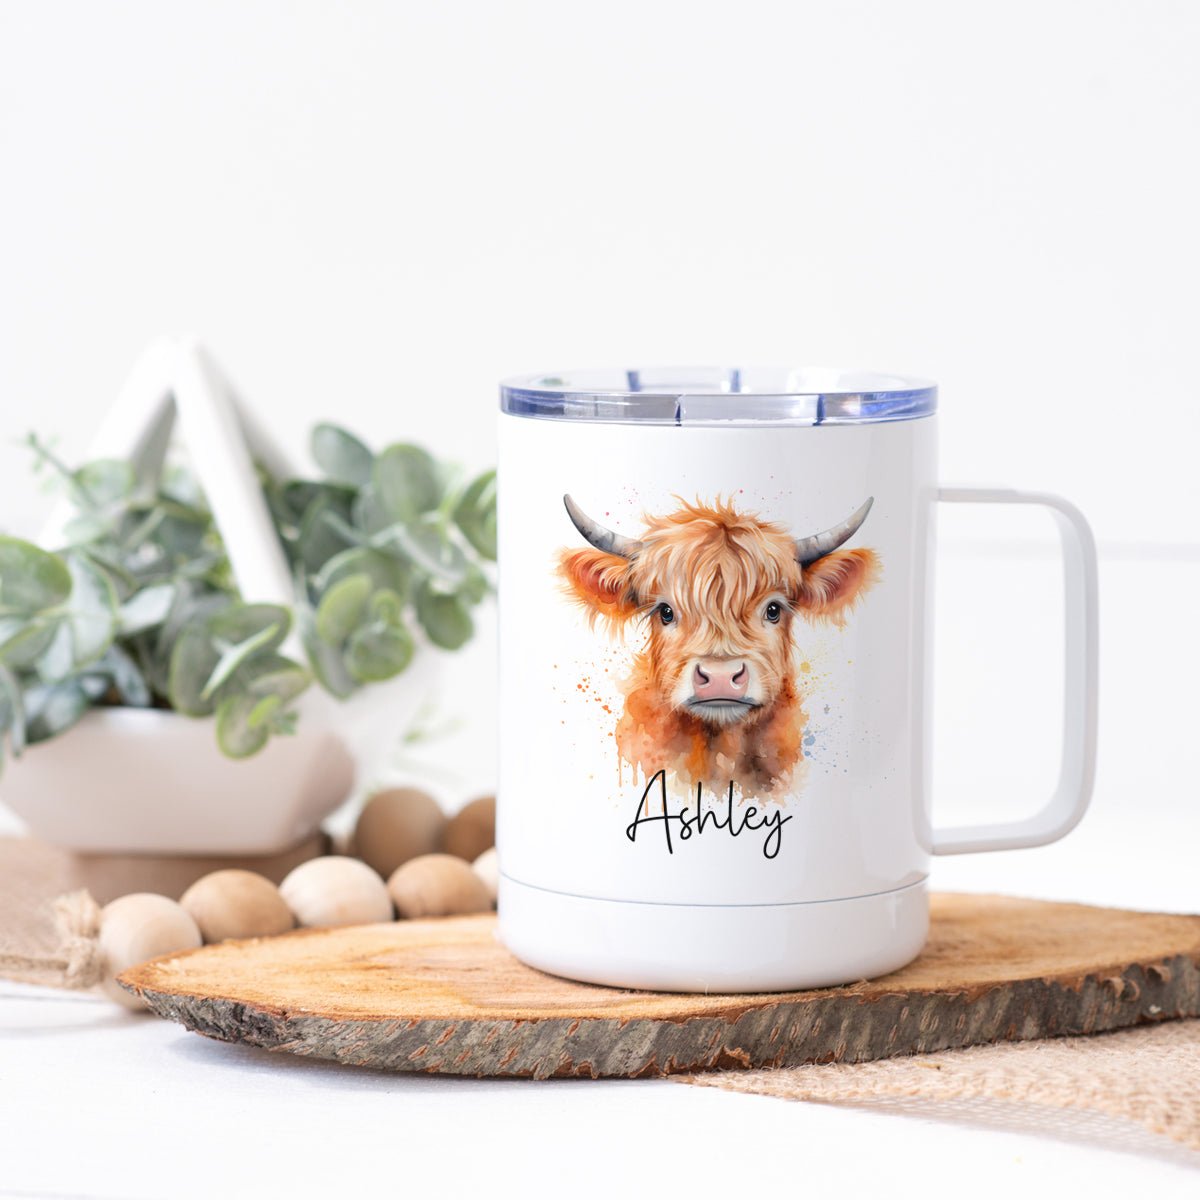 https://cdn.shopify.com/s/files/1/0522/5532/6403/products/personalized-highland-cow-face-stainless-steel-coffee-cup-474791_1600x.jpg?v=1698518424